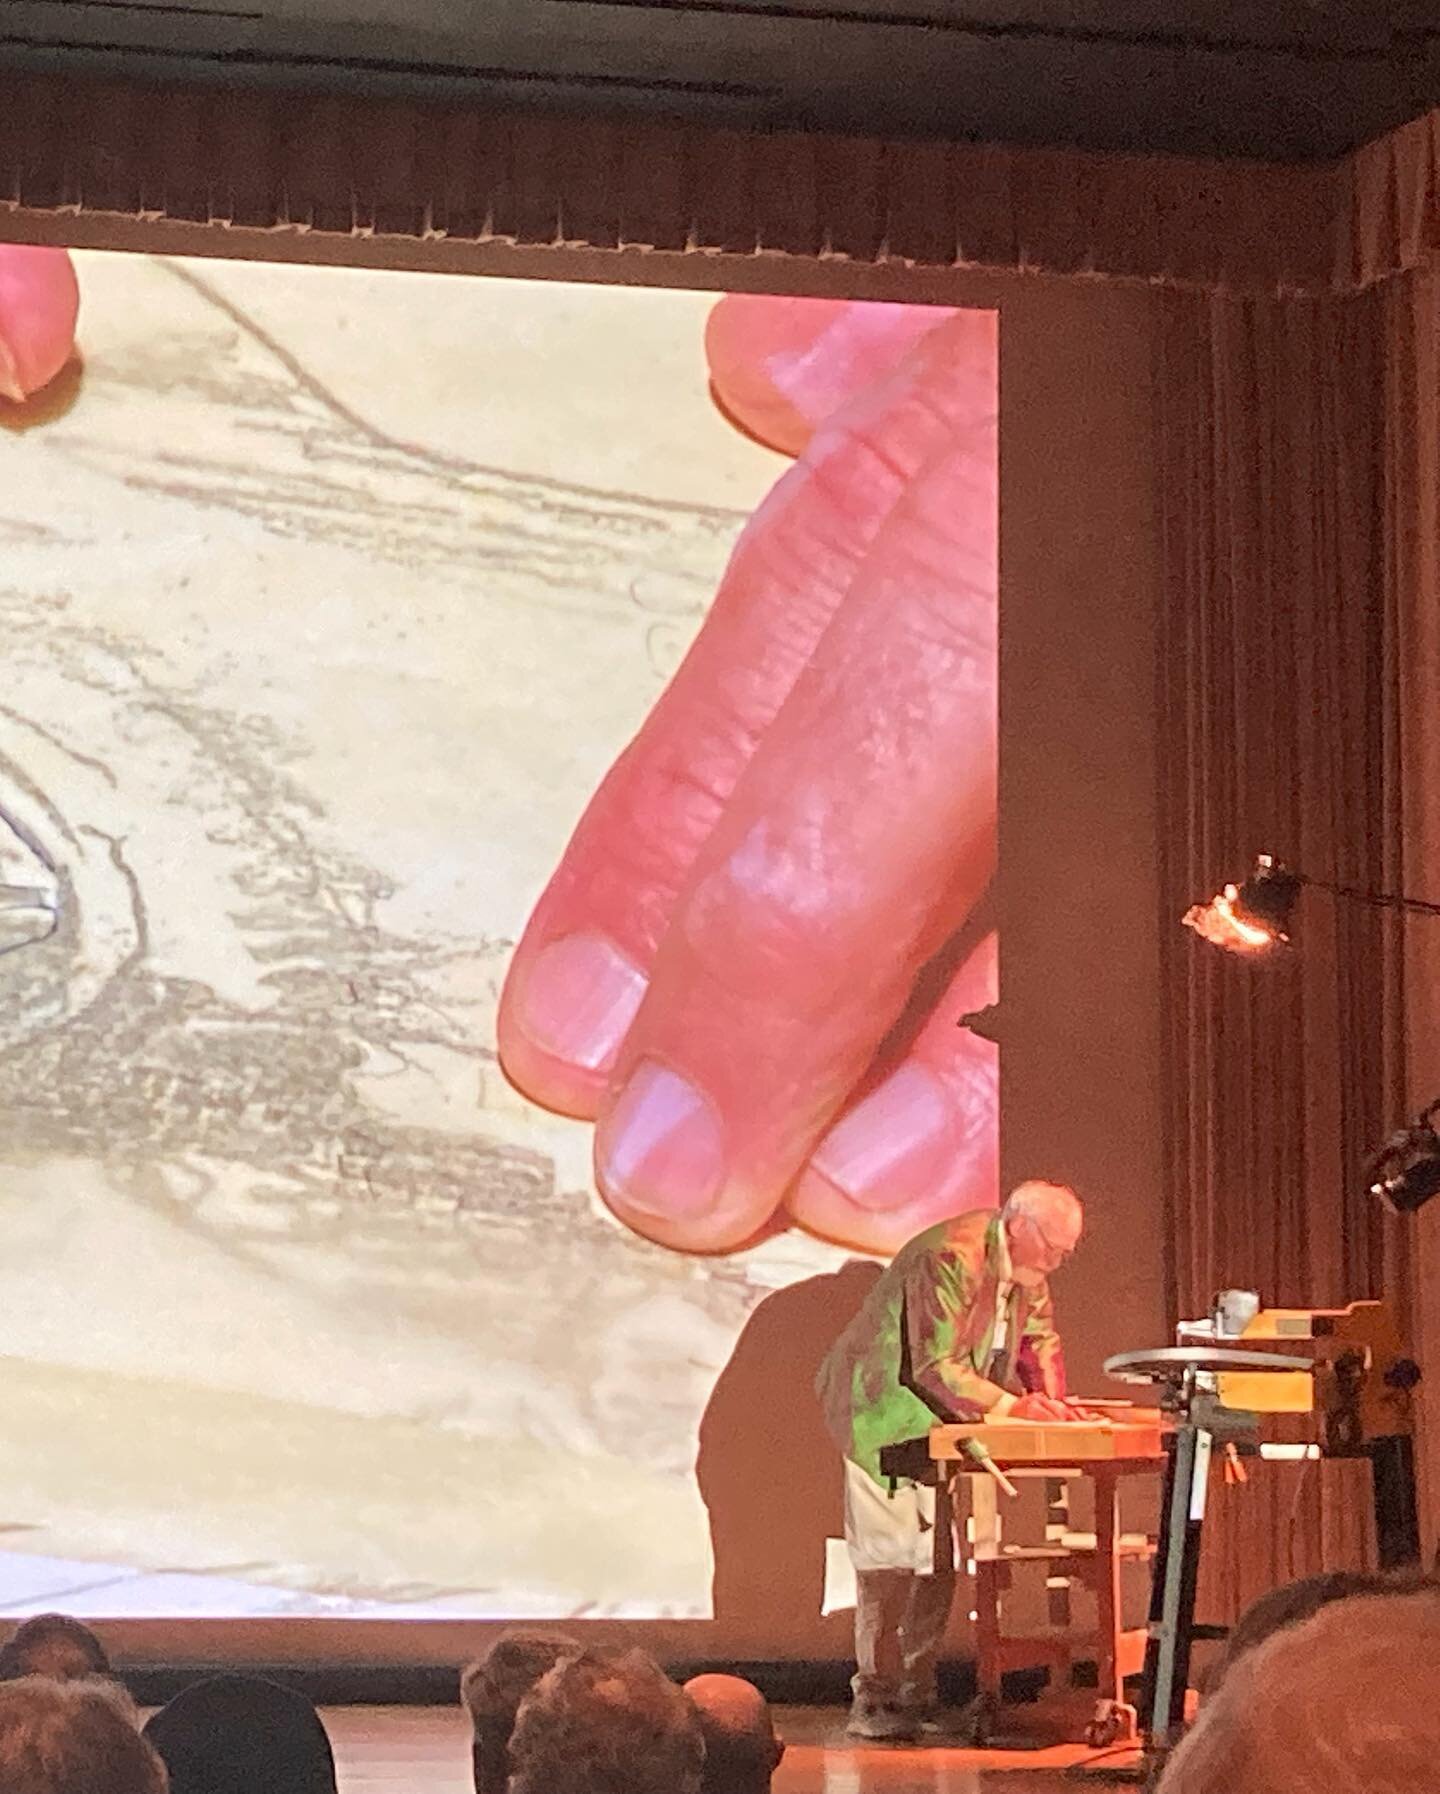 Here are some shots from the #winterthurmuseum at the recent #wonderofwood conference. Attended some amazing lectures on the history of decorative inlay and marquetry in furniture including live demonstrations by modern day practitioners of the art i